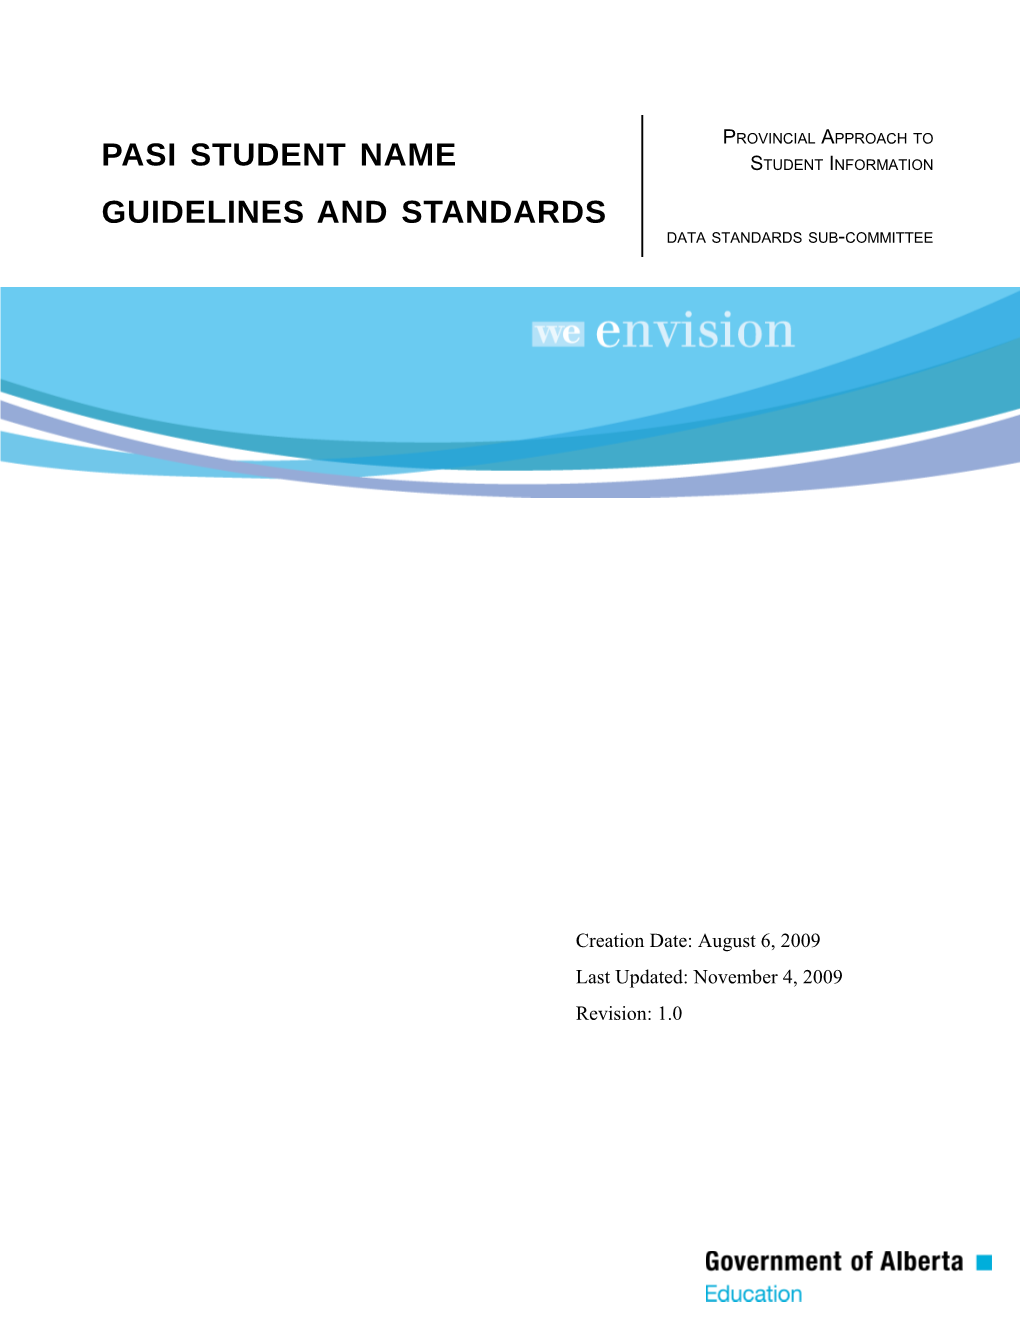 Data Standards Name Guidelines And Standards